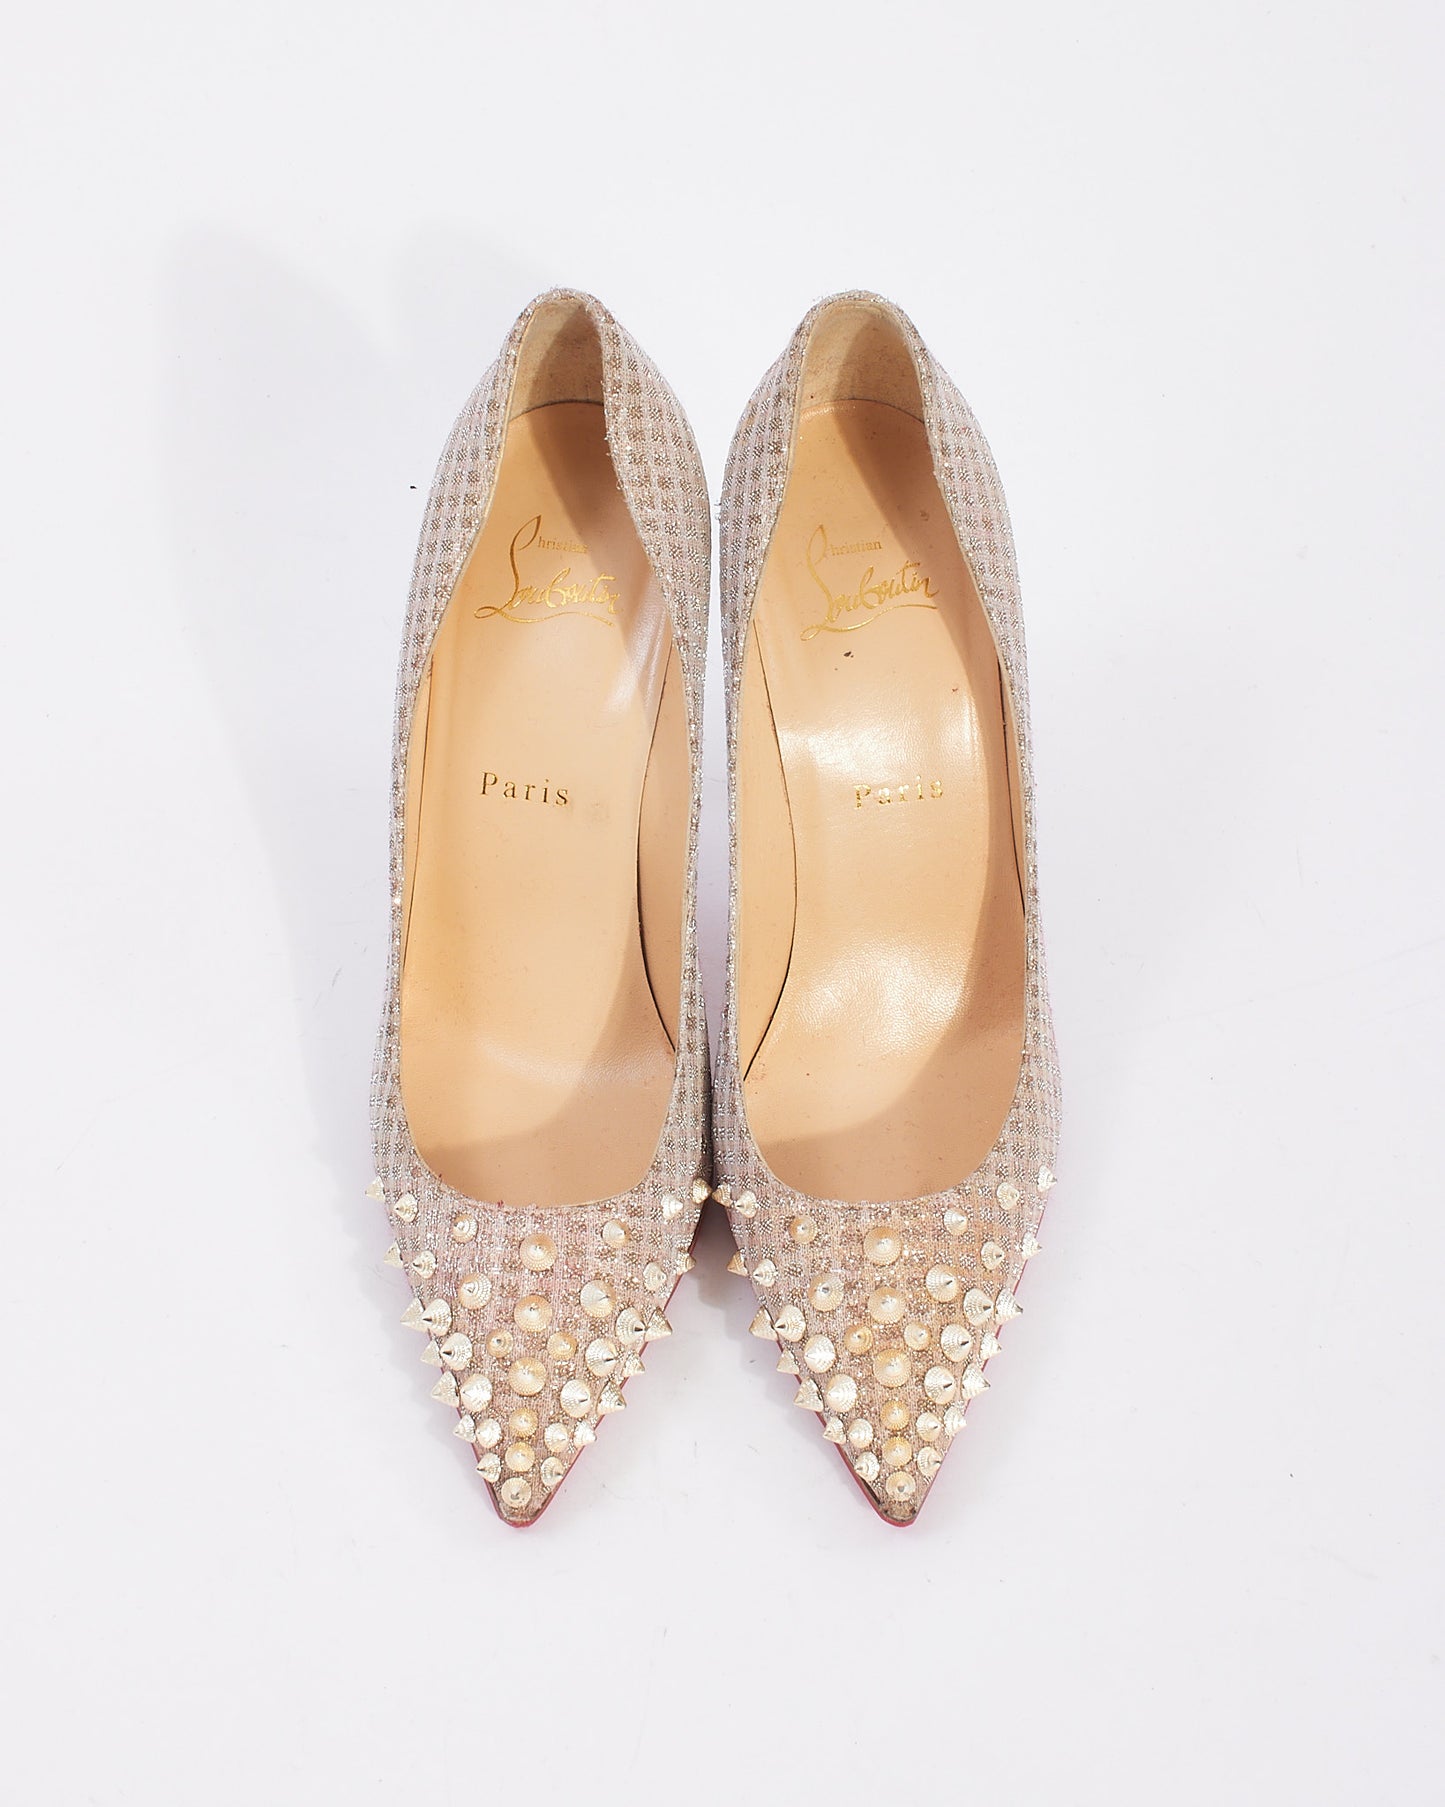 Christian Louboutin Blush/Silver Lame Spike Pointed Toe Pumps - 37.5